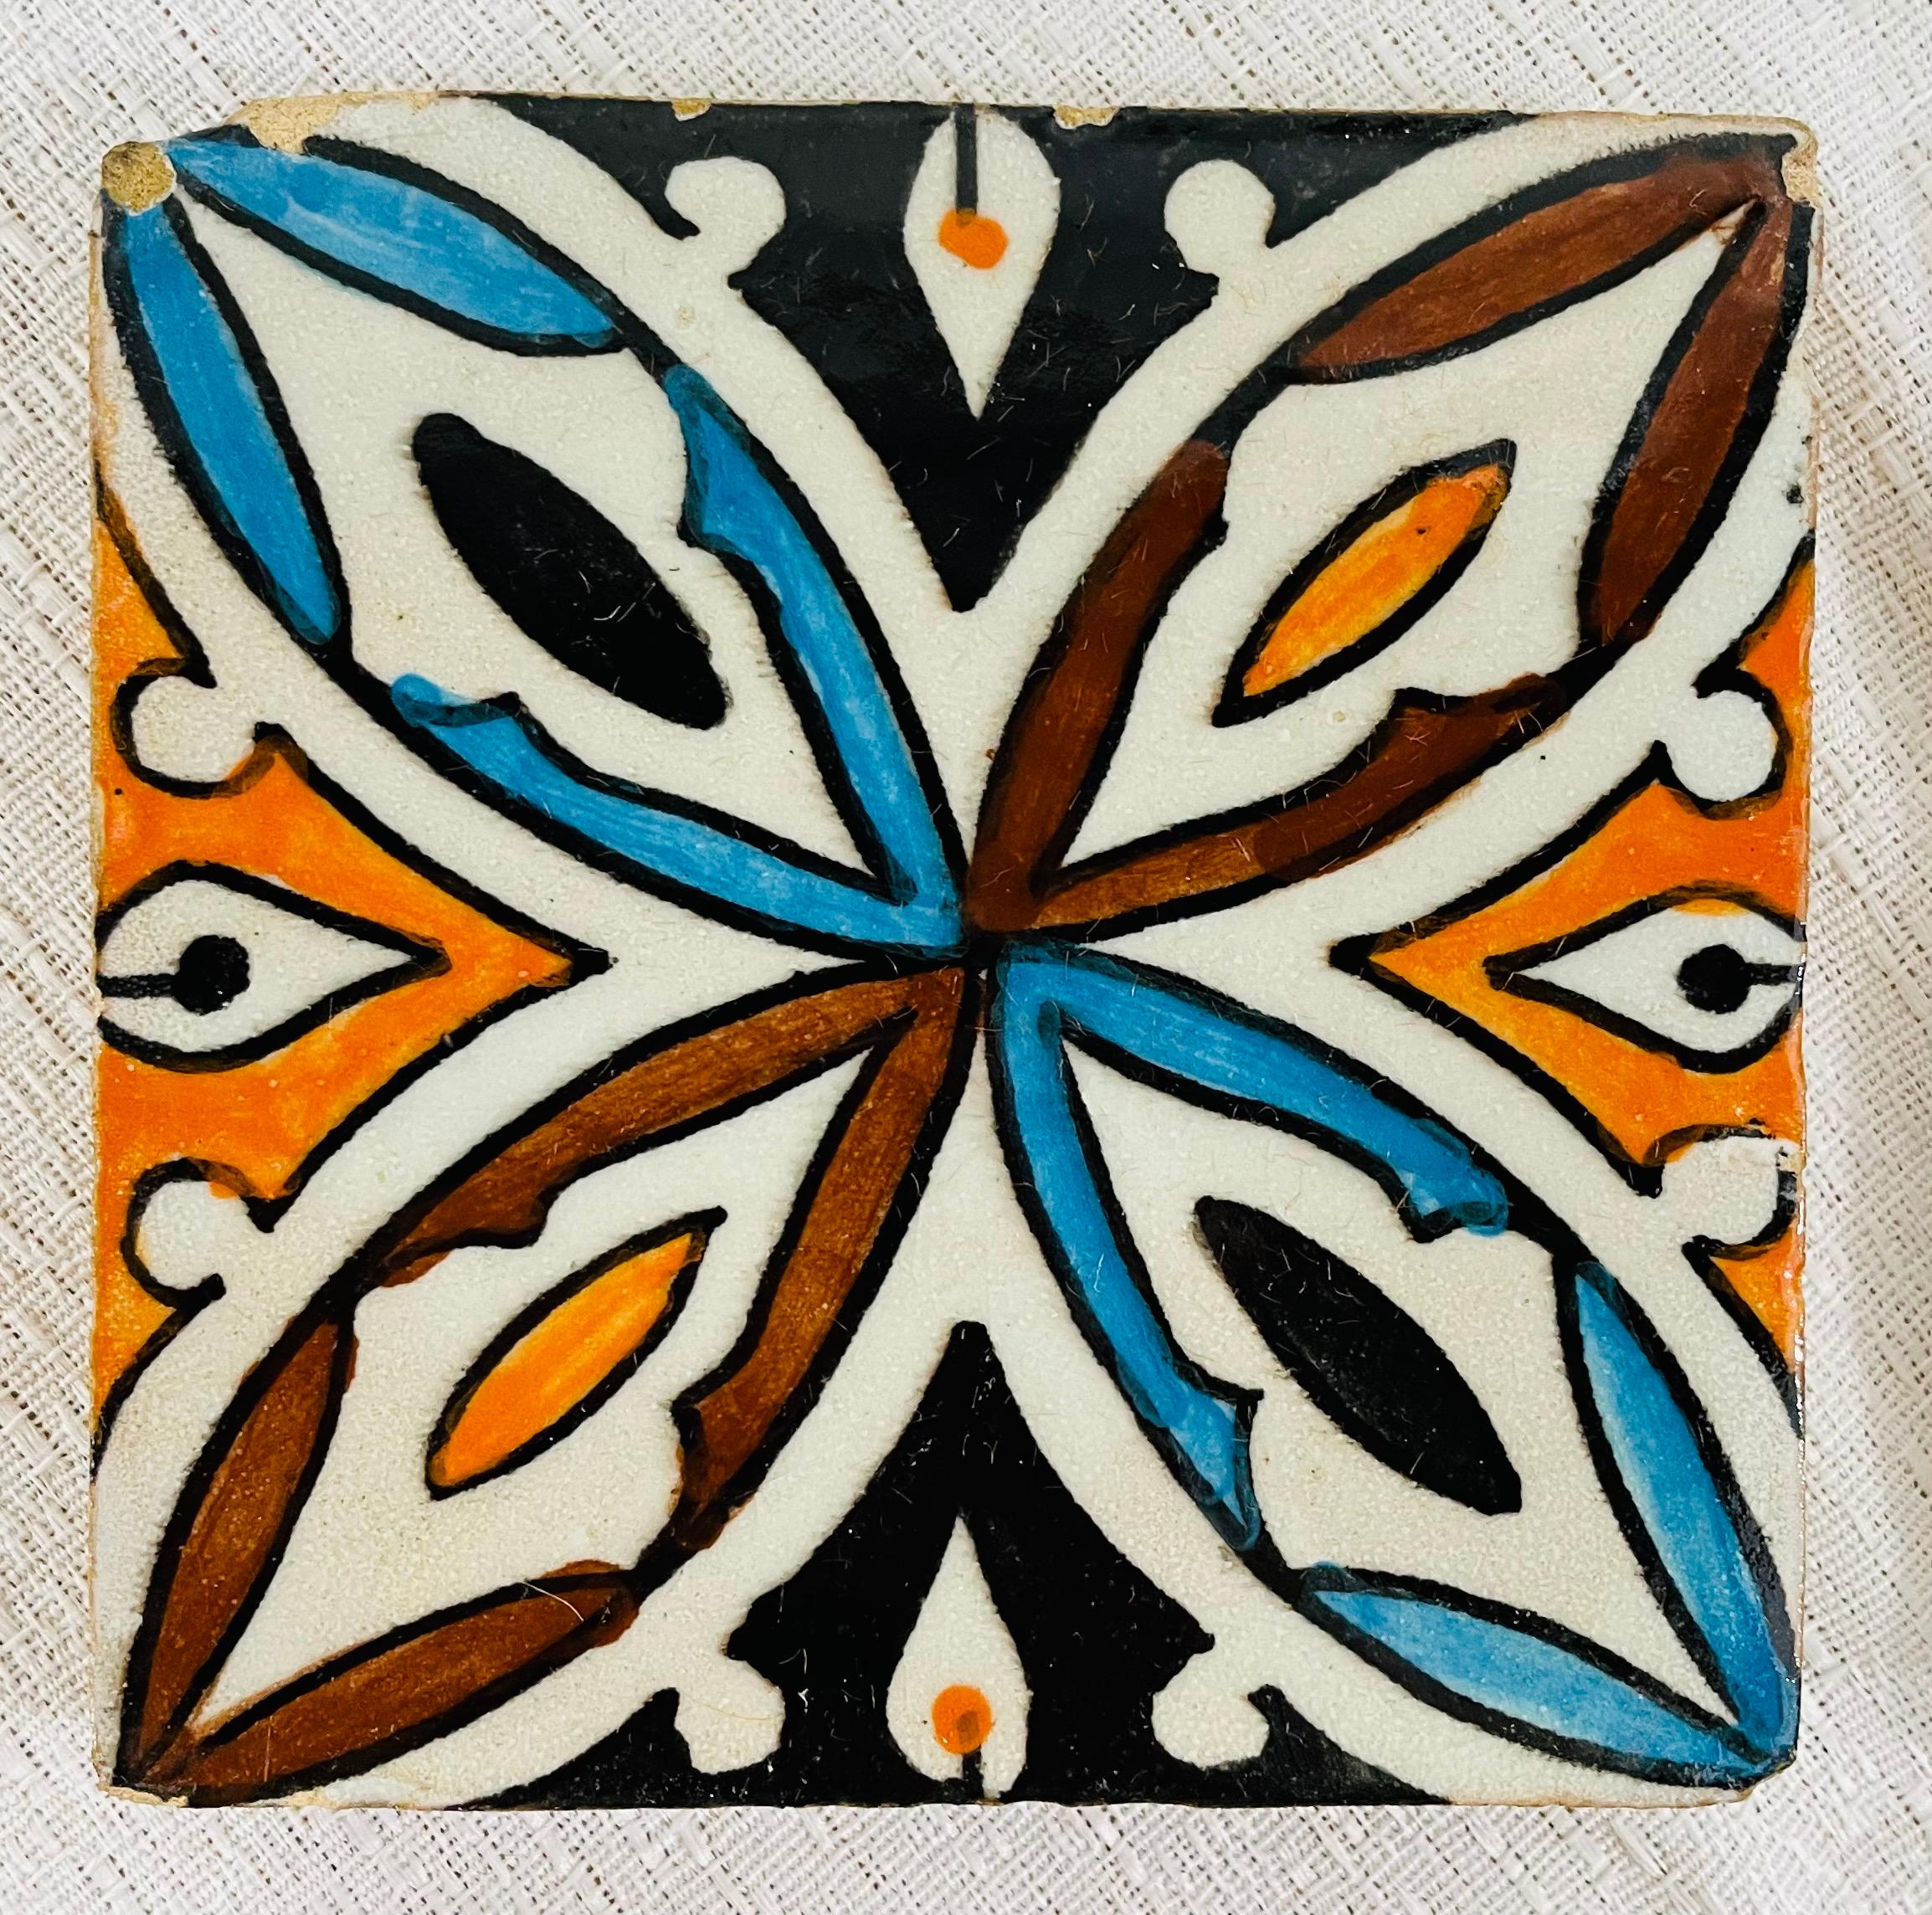 A set of four ceramic hand painted Moroccan coasters or tiles featuring lovely geometrical design. 

Dimensions: 4